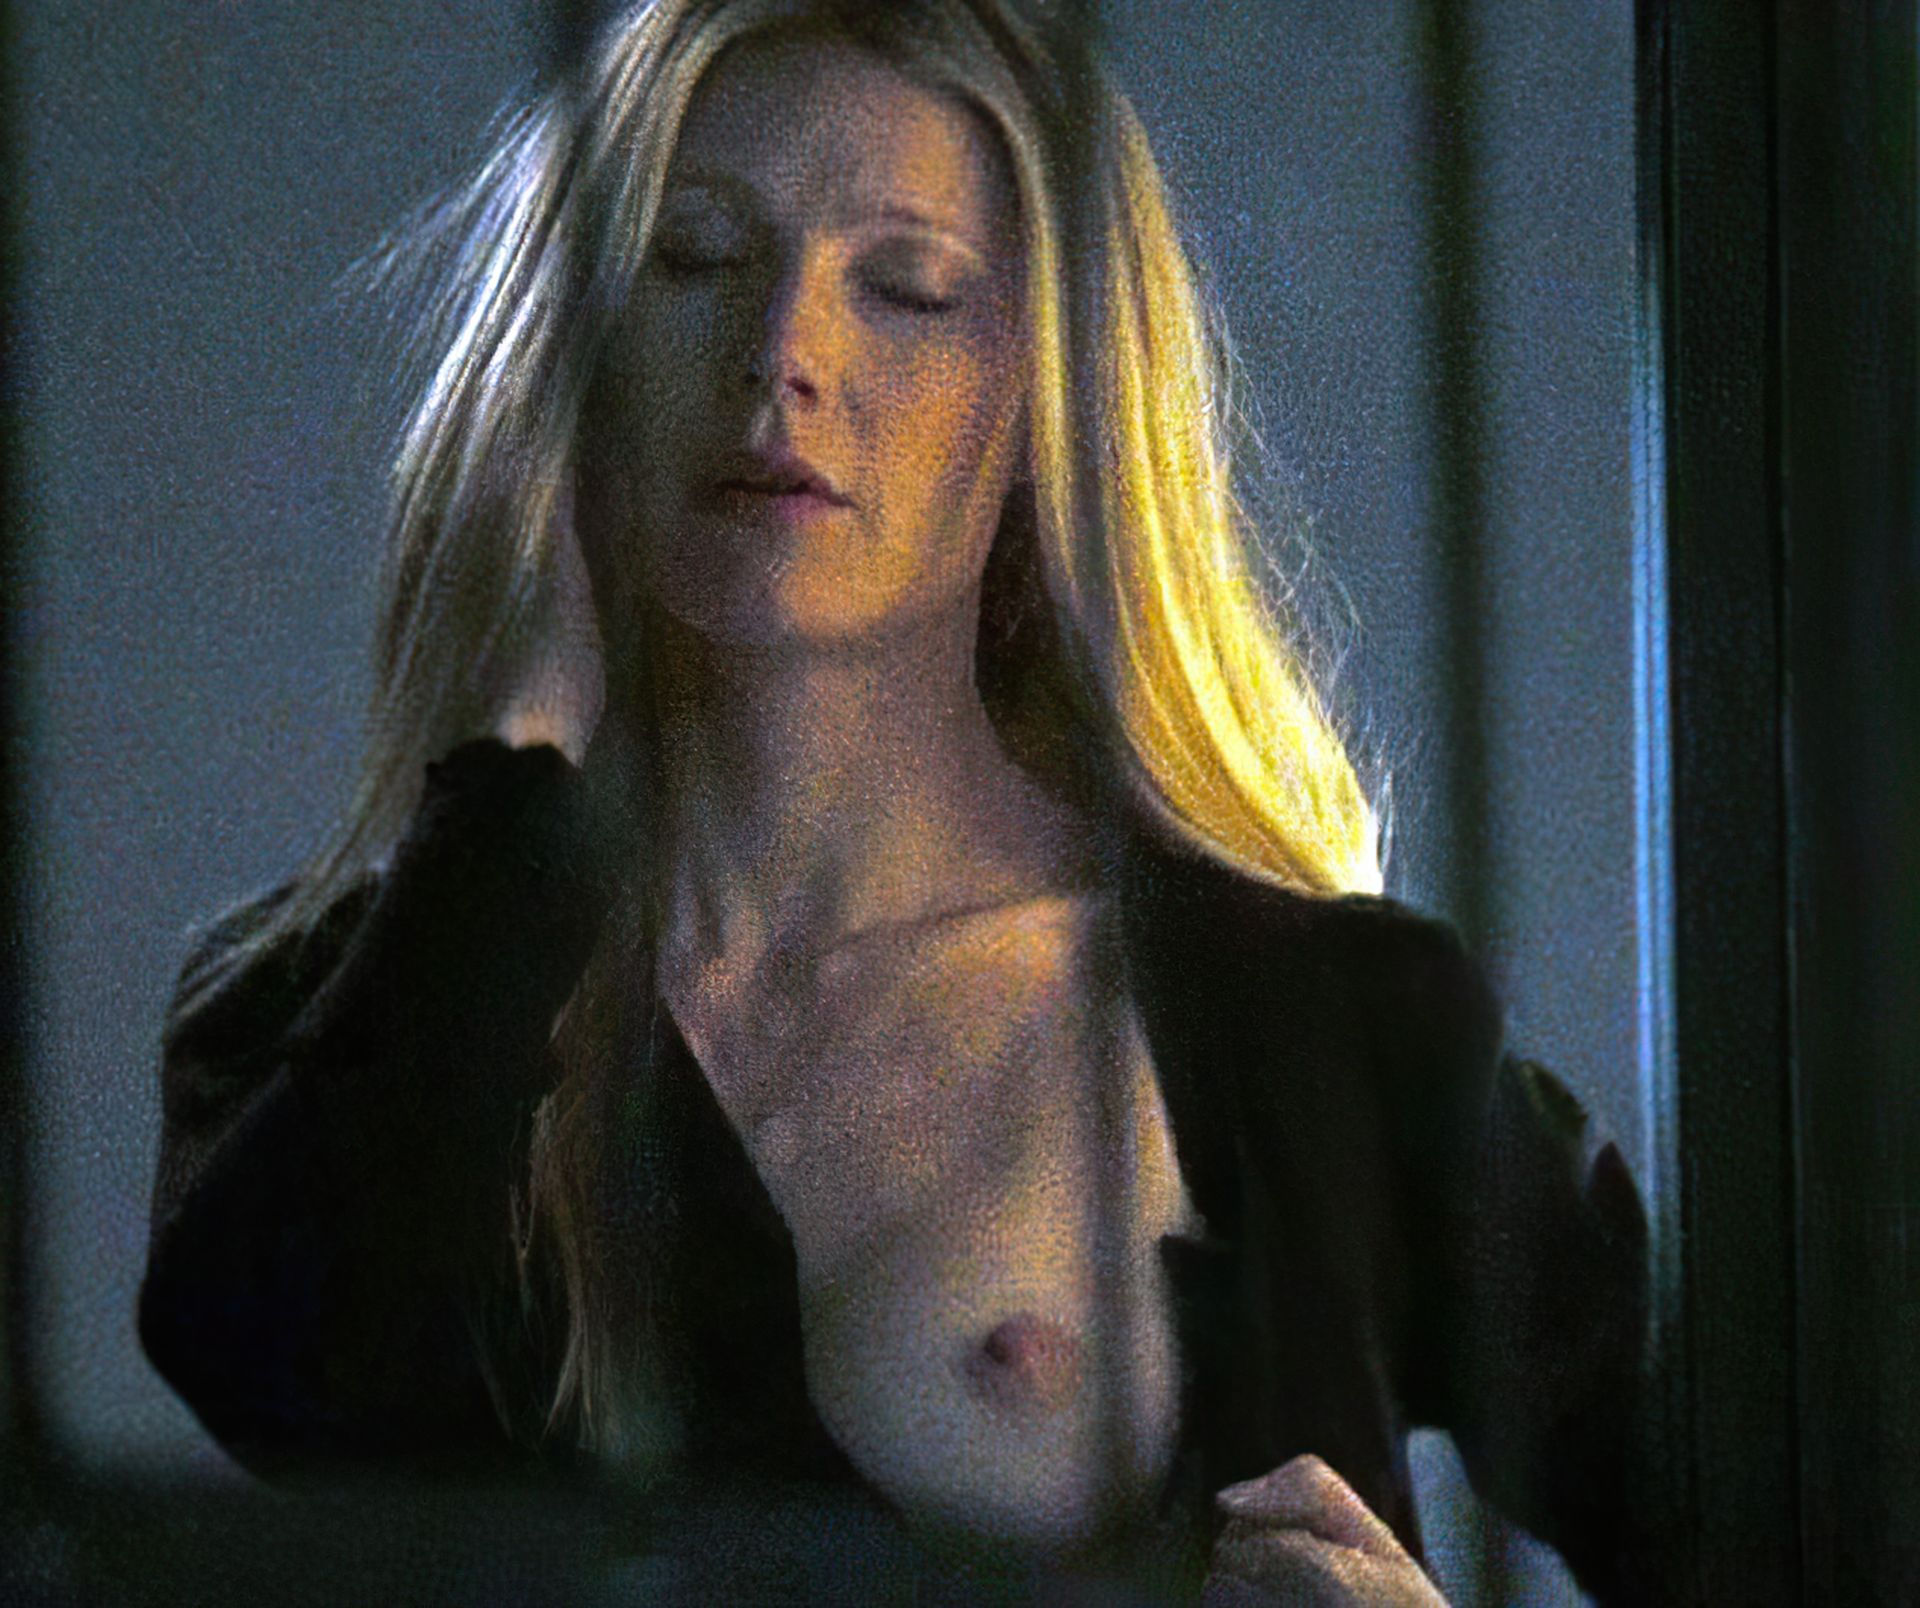 Gwyneth paltrow nude pictures